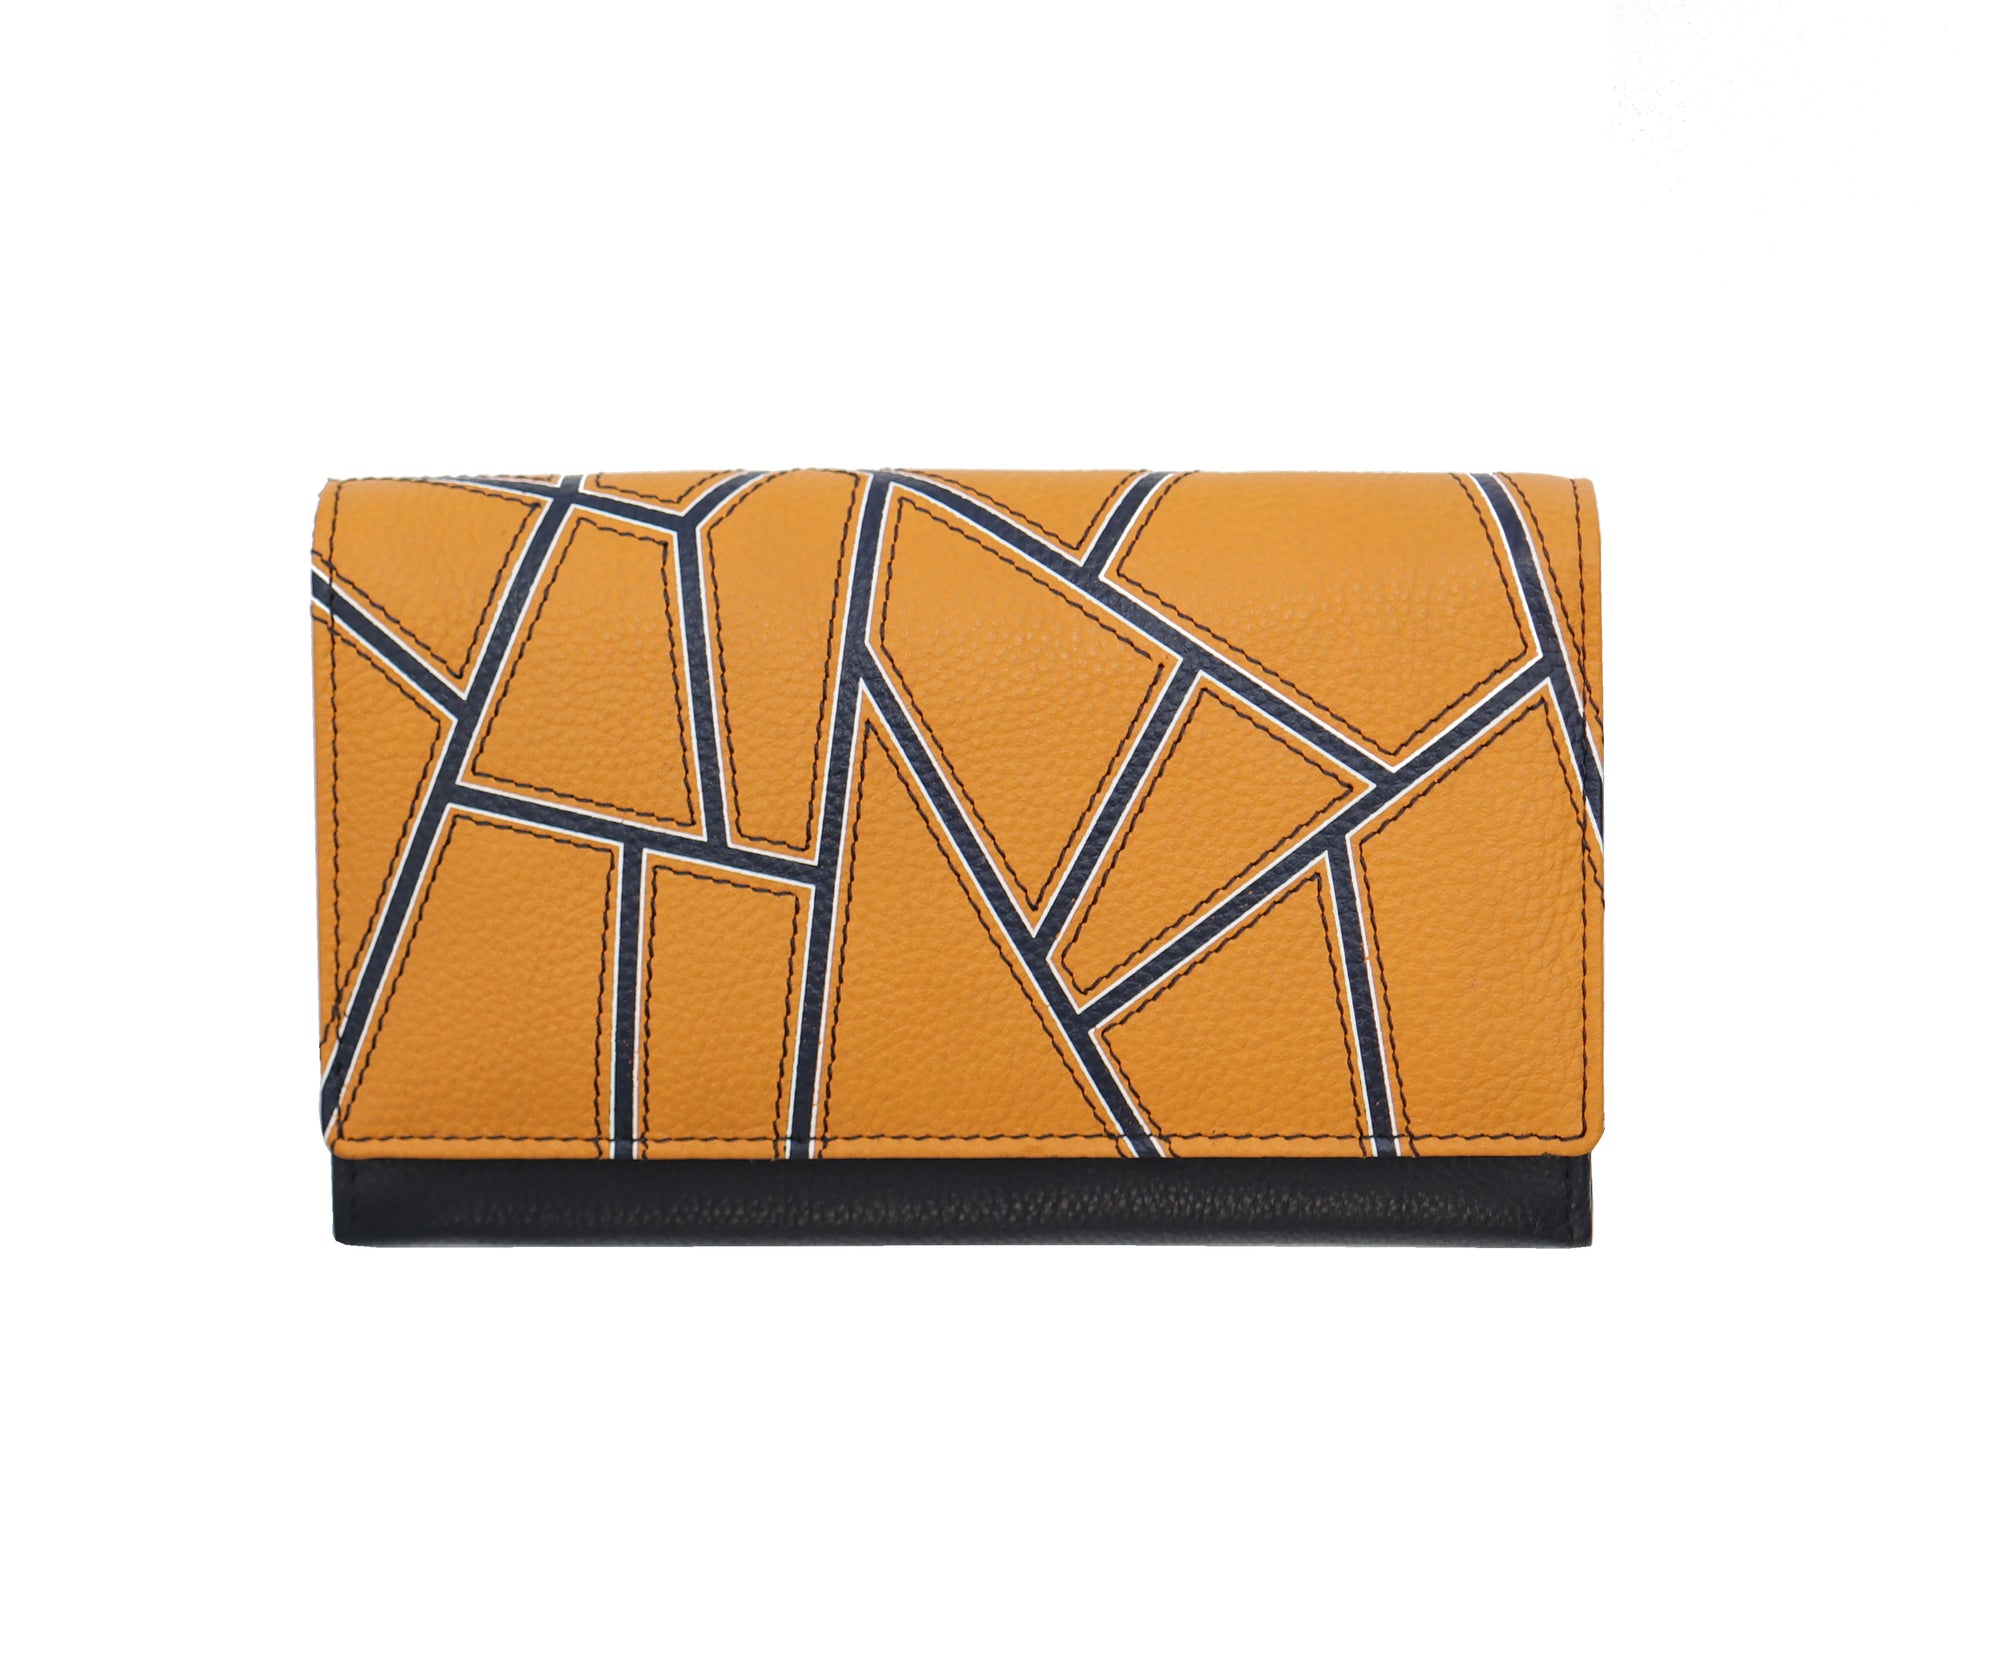 Aspen Abstract RFID Leather Matinee Artic Purse  - 2901